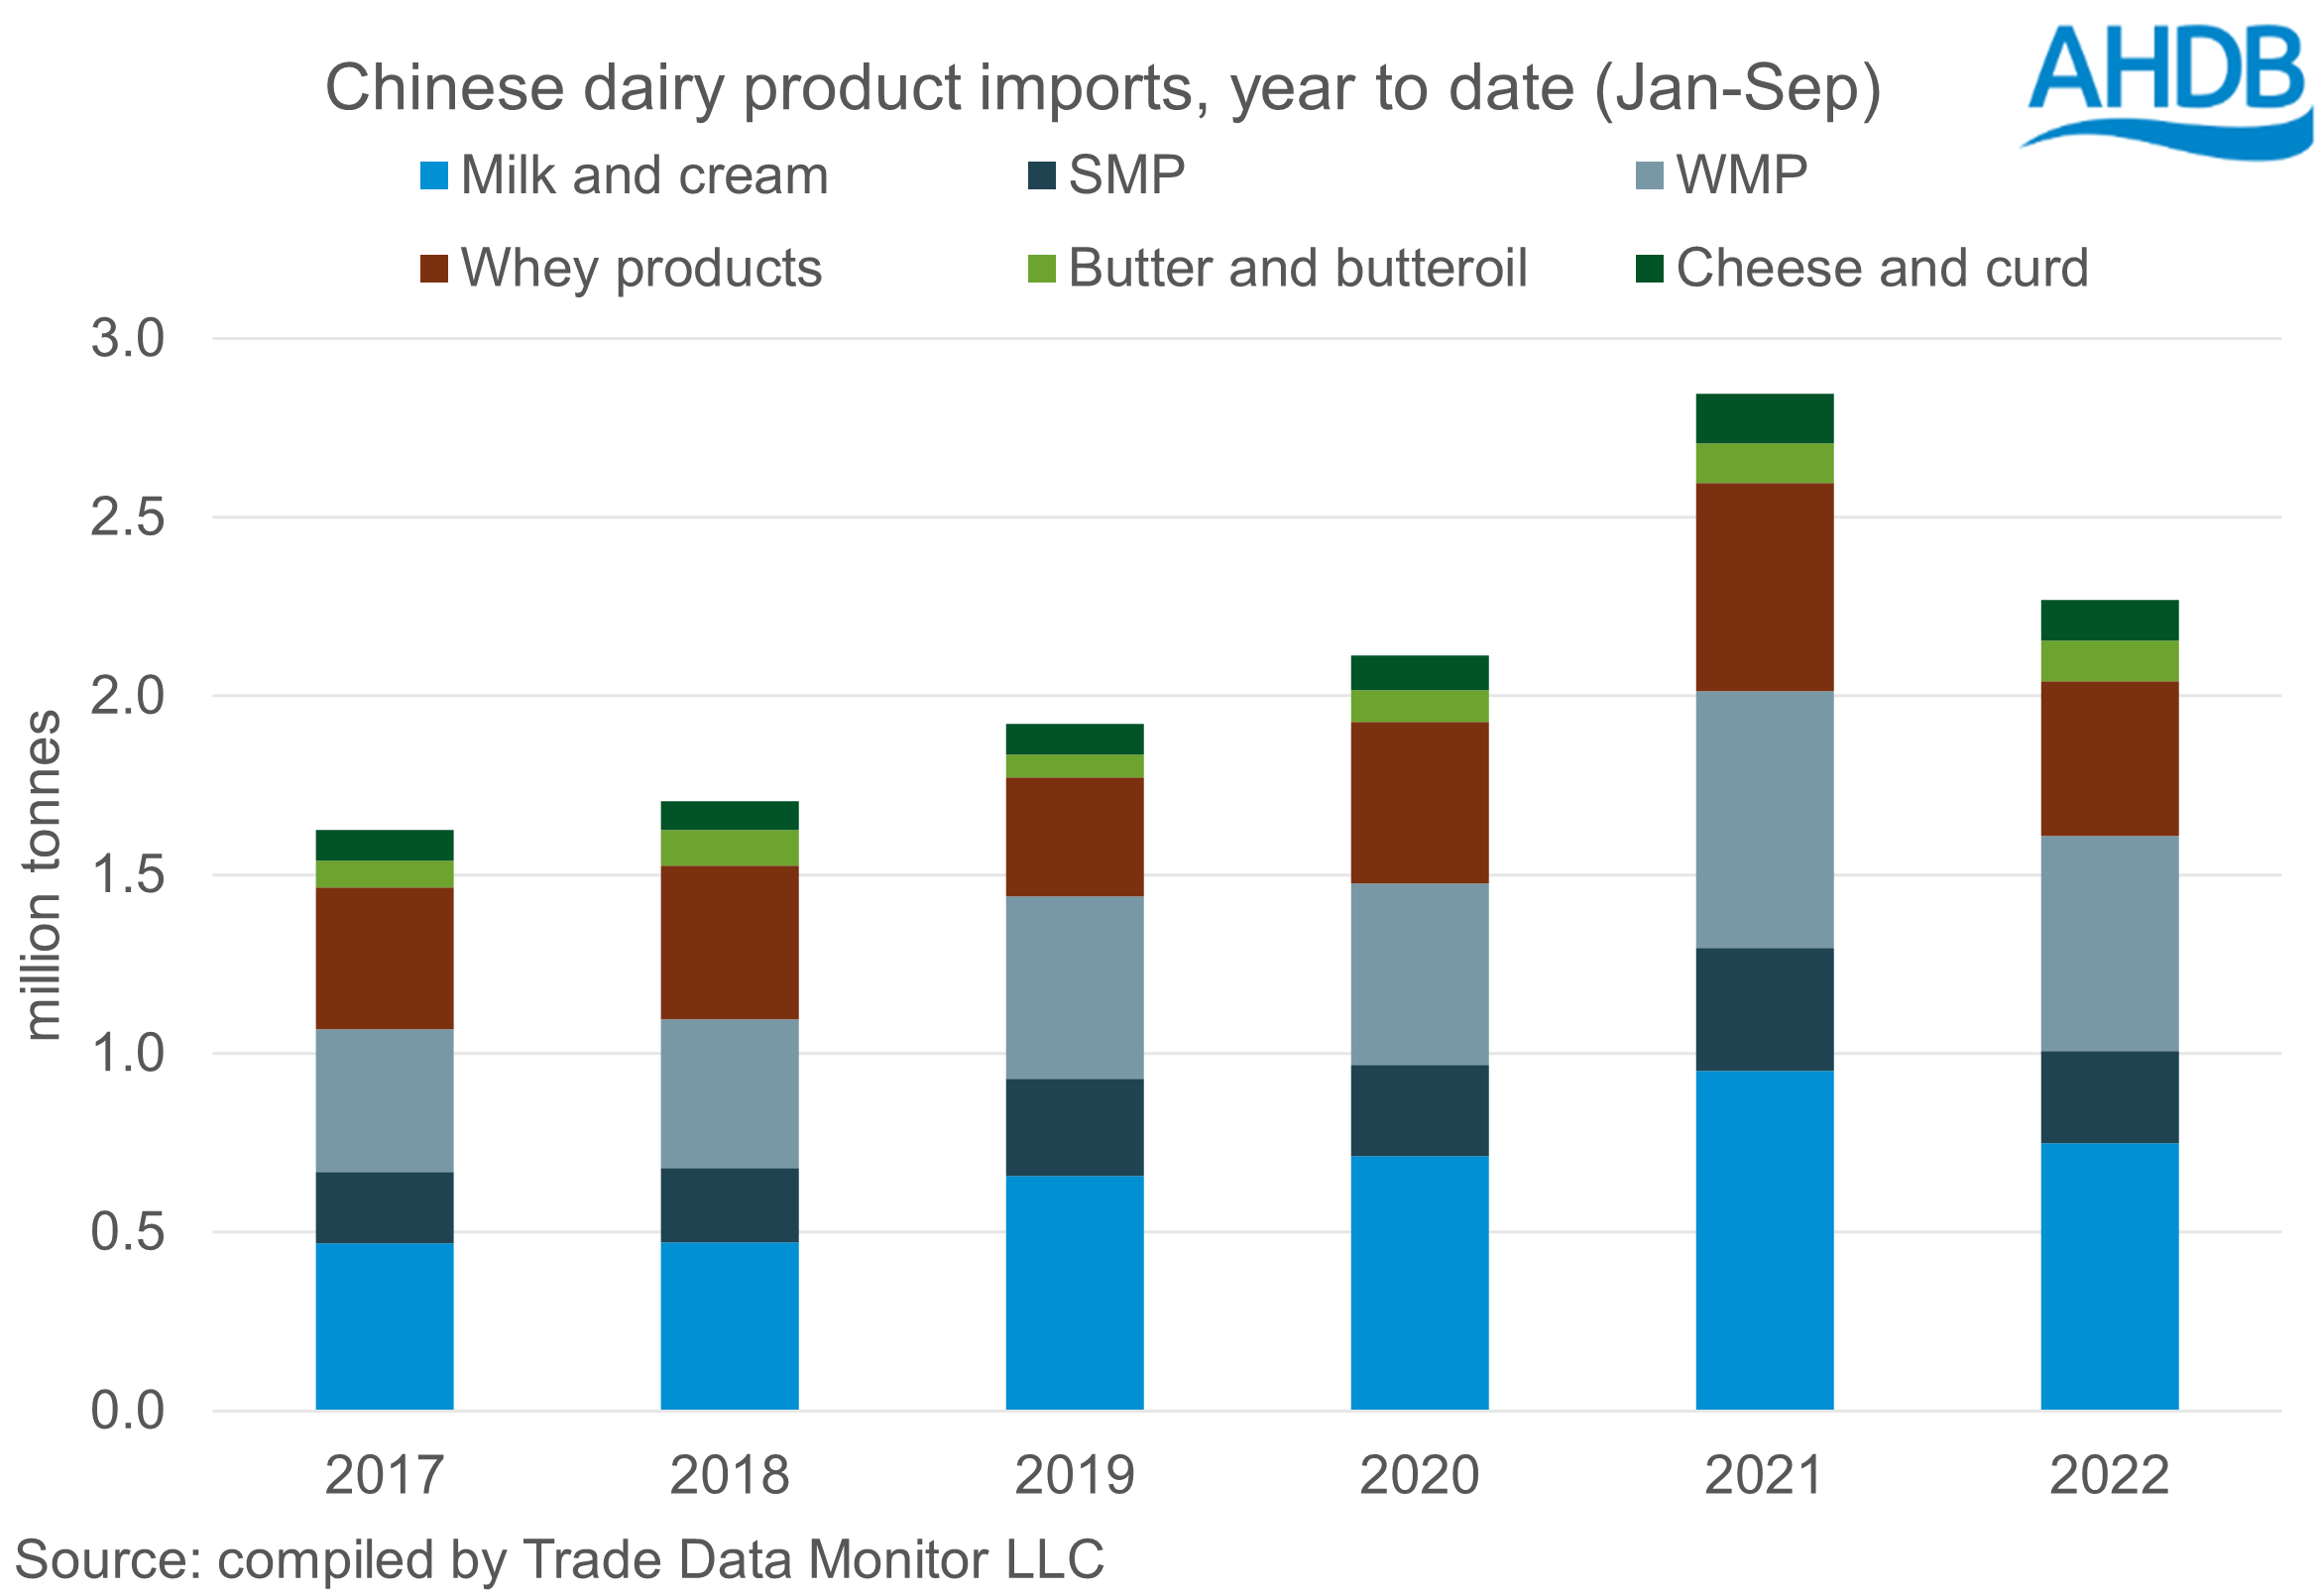 bar chart showing volumes of Chinese dairy imports by product 